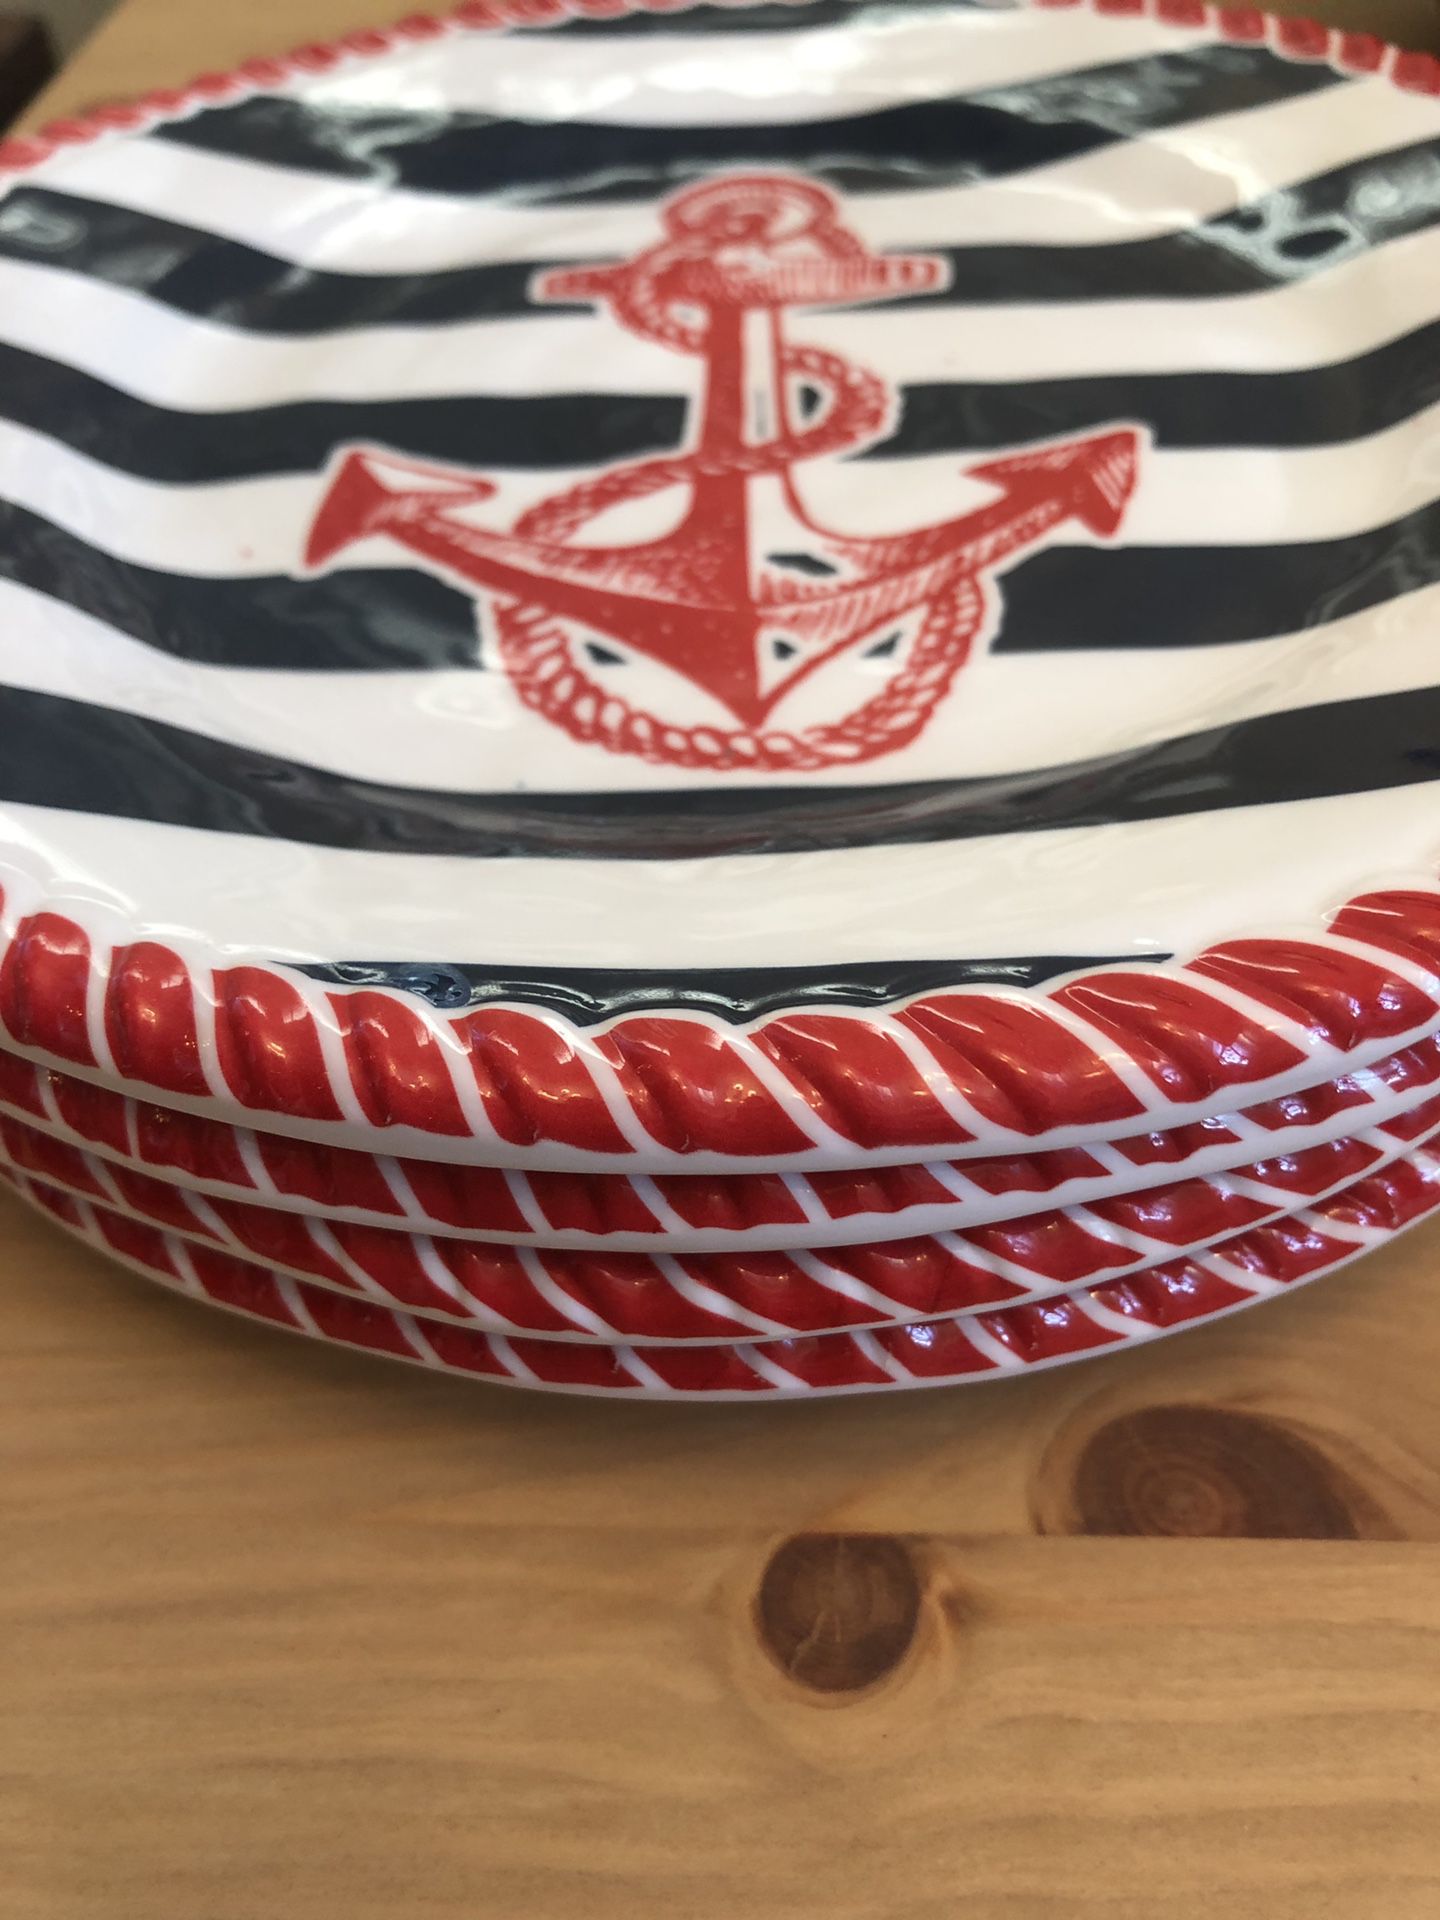 Tommy Bahama plates and bowls